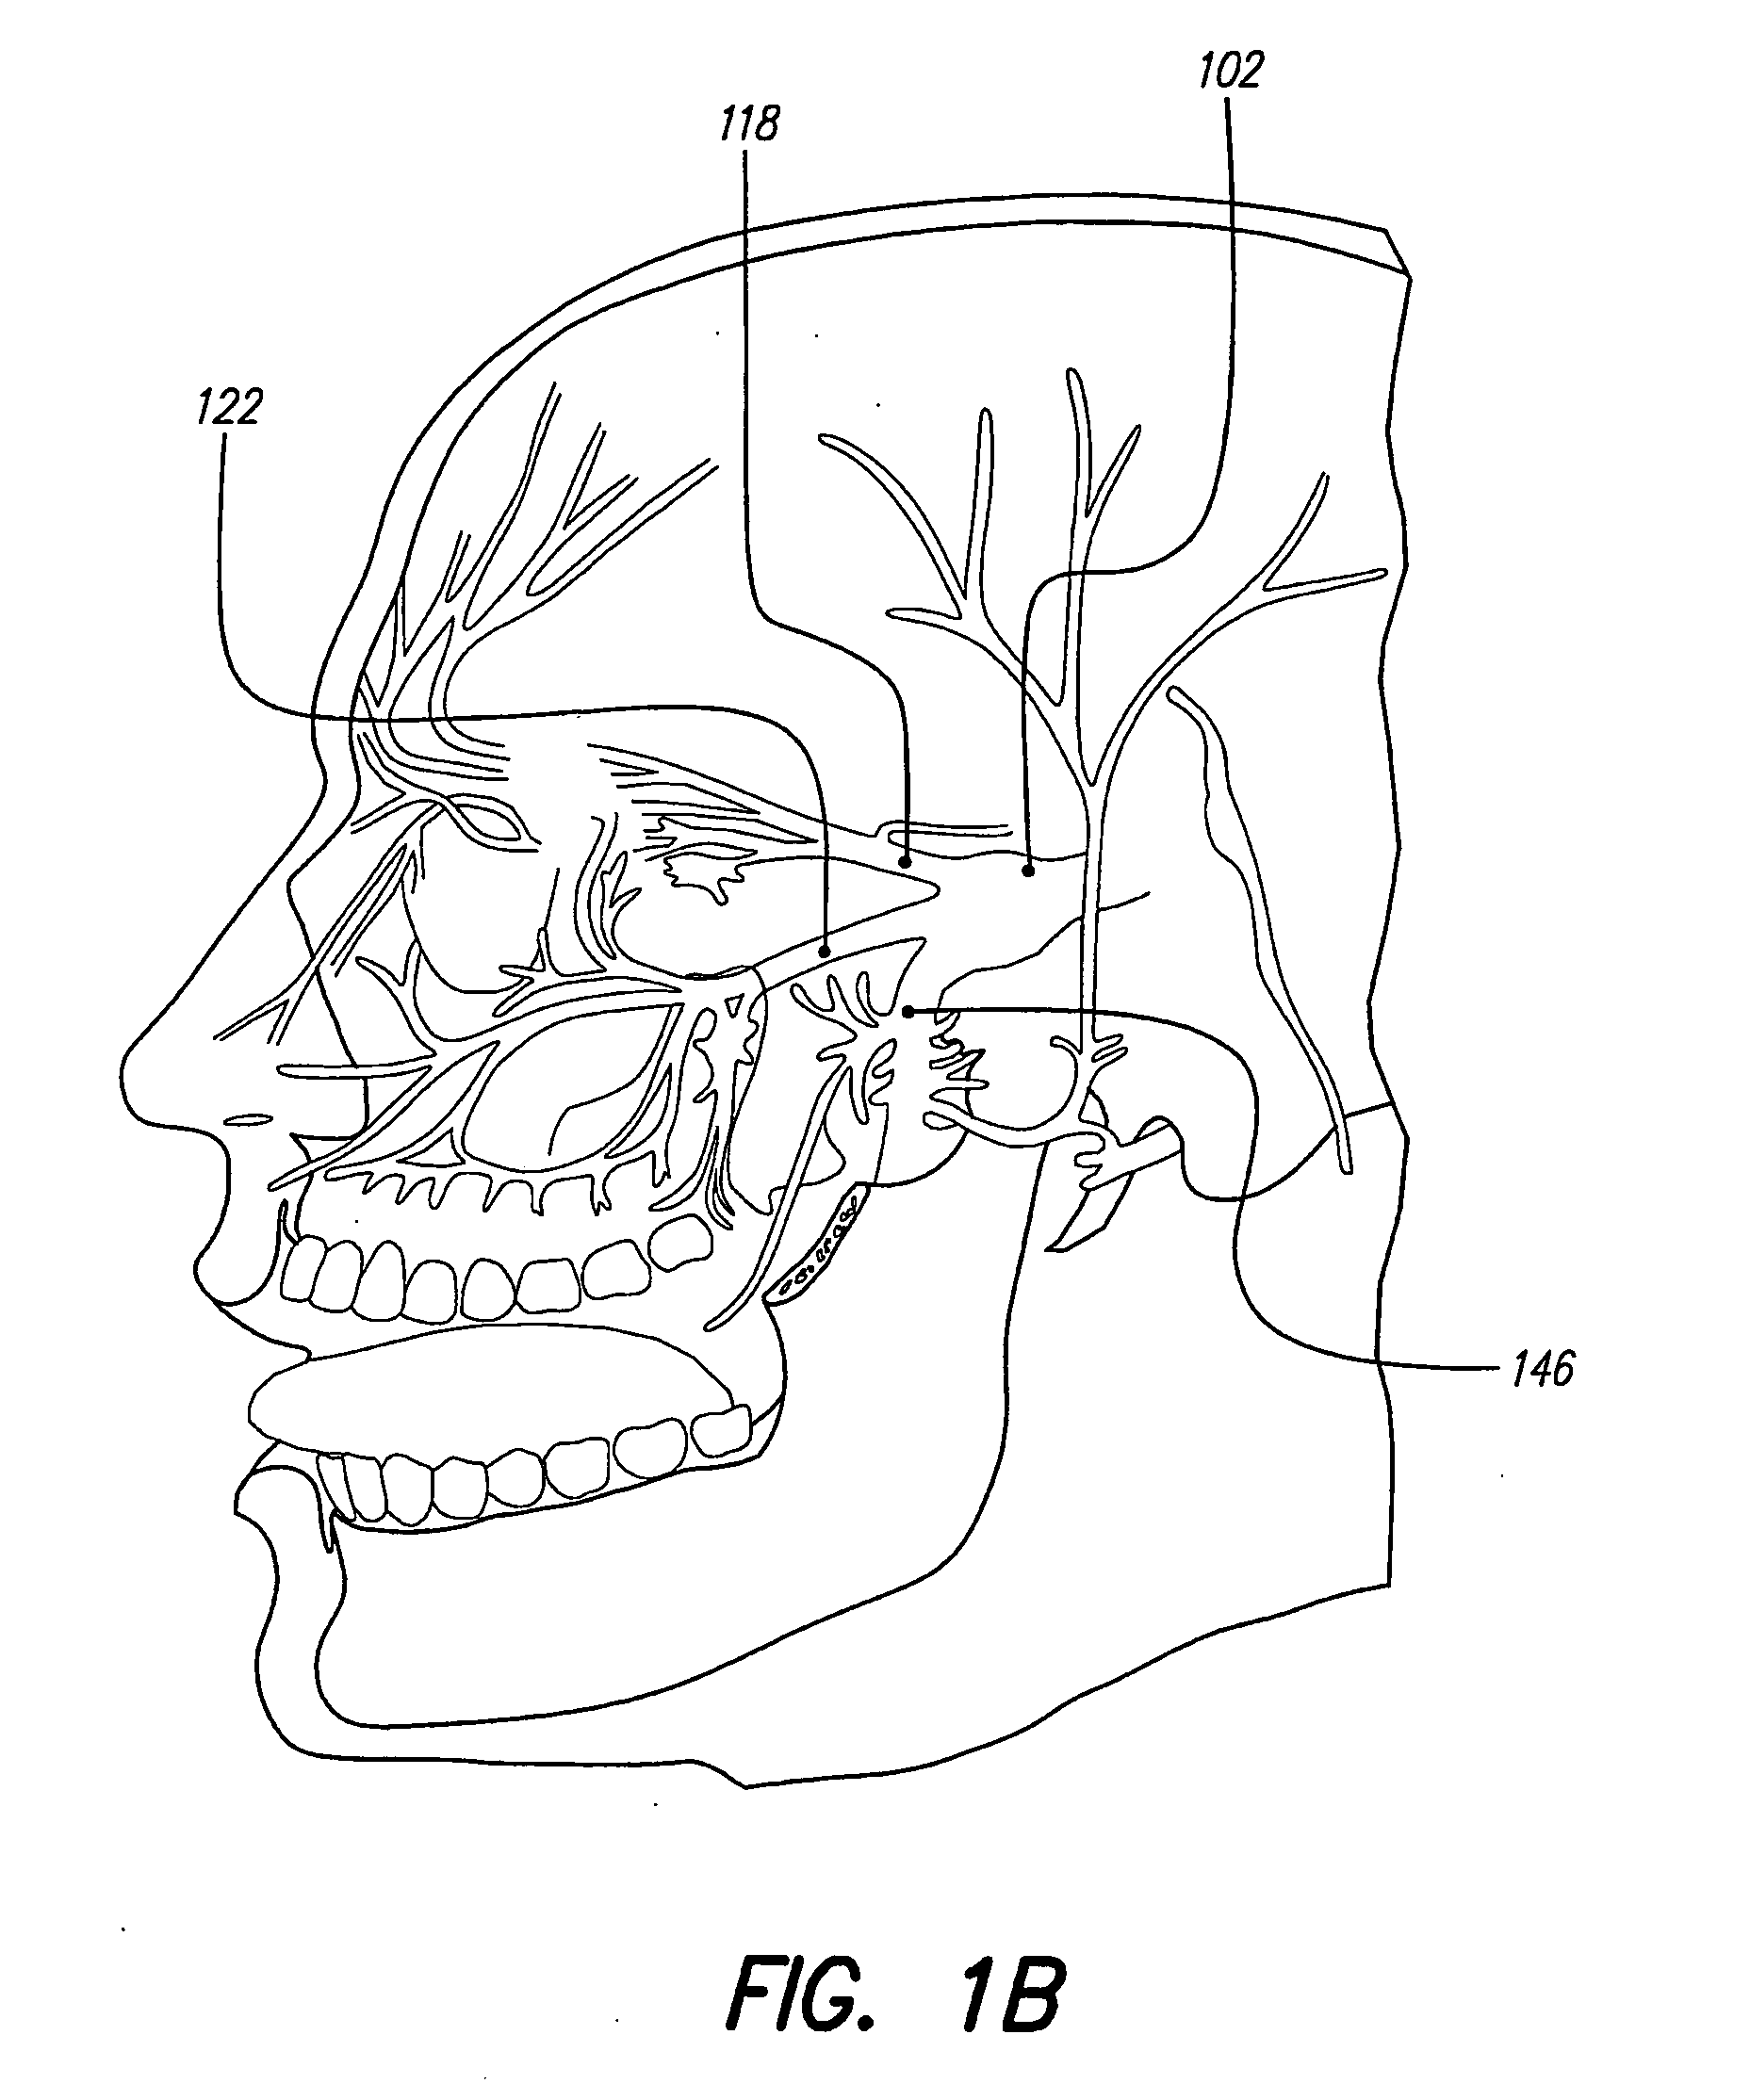 Skull-mounted electrical stimulation system and method for treating patients